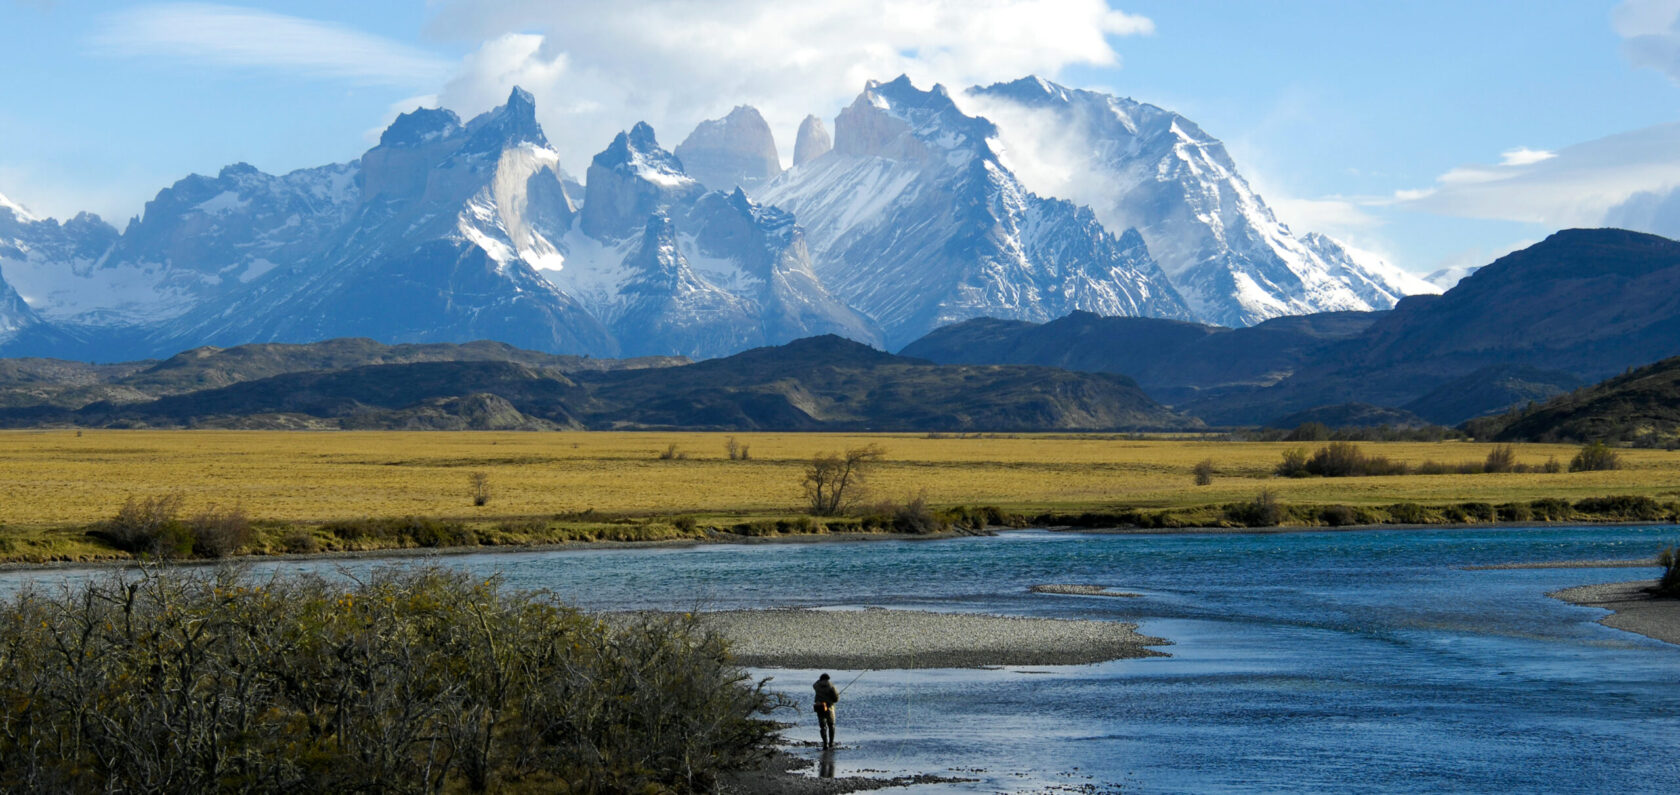 Patagonia's Cerro Torre in the distance with a fly fisherman in the foreground.